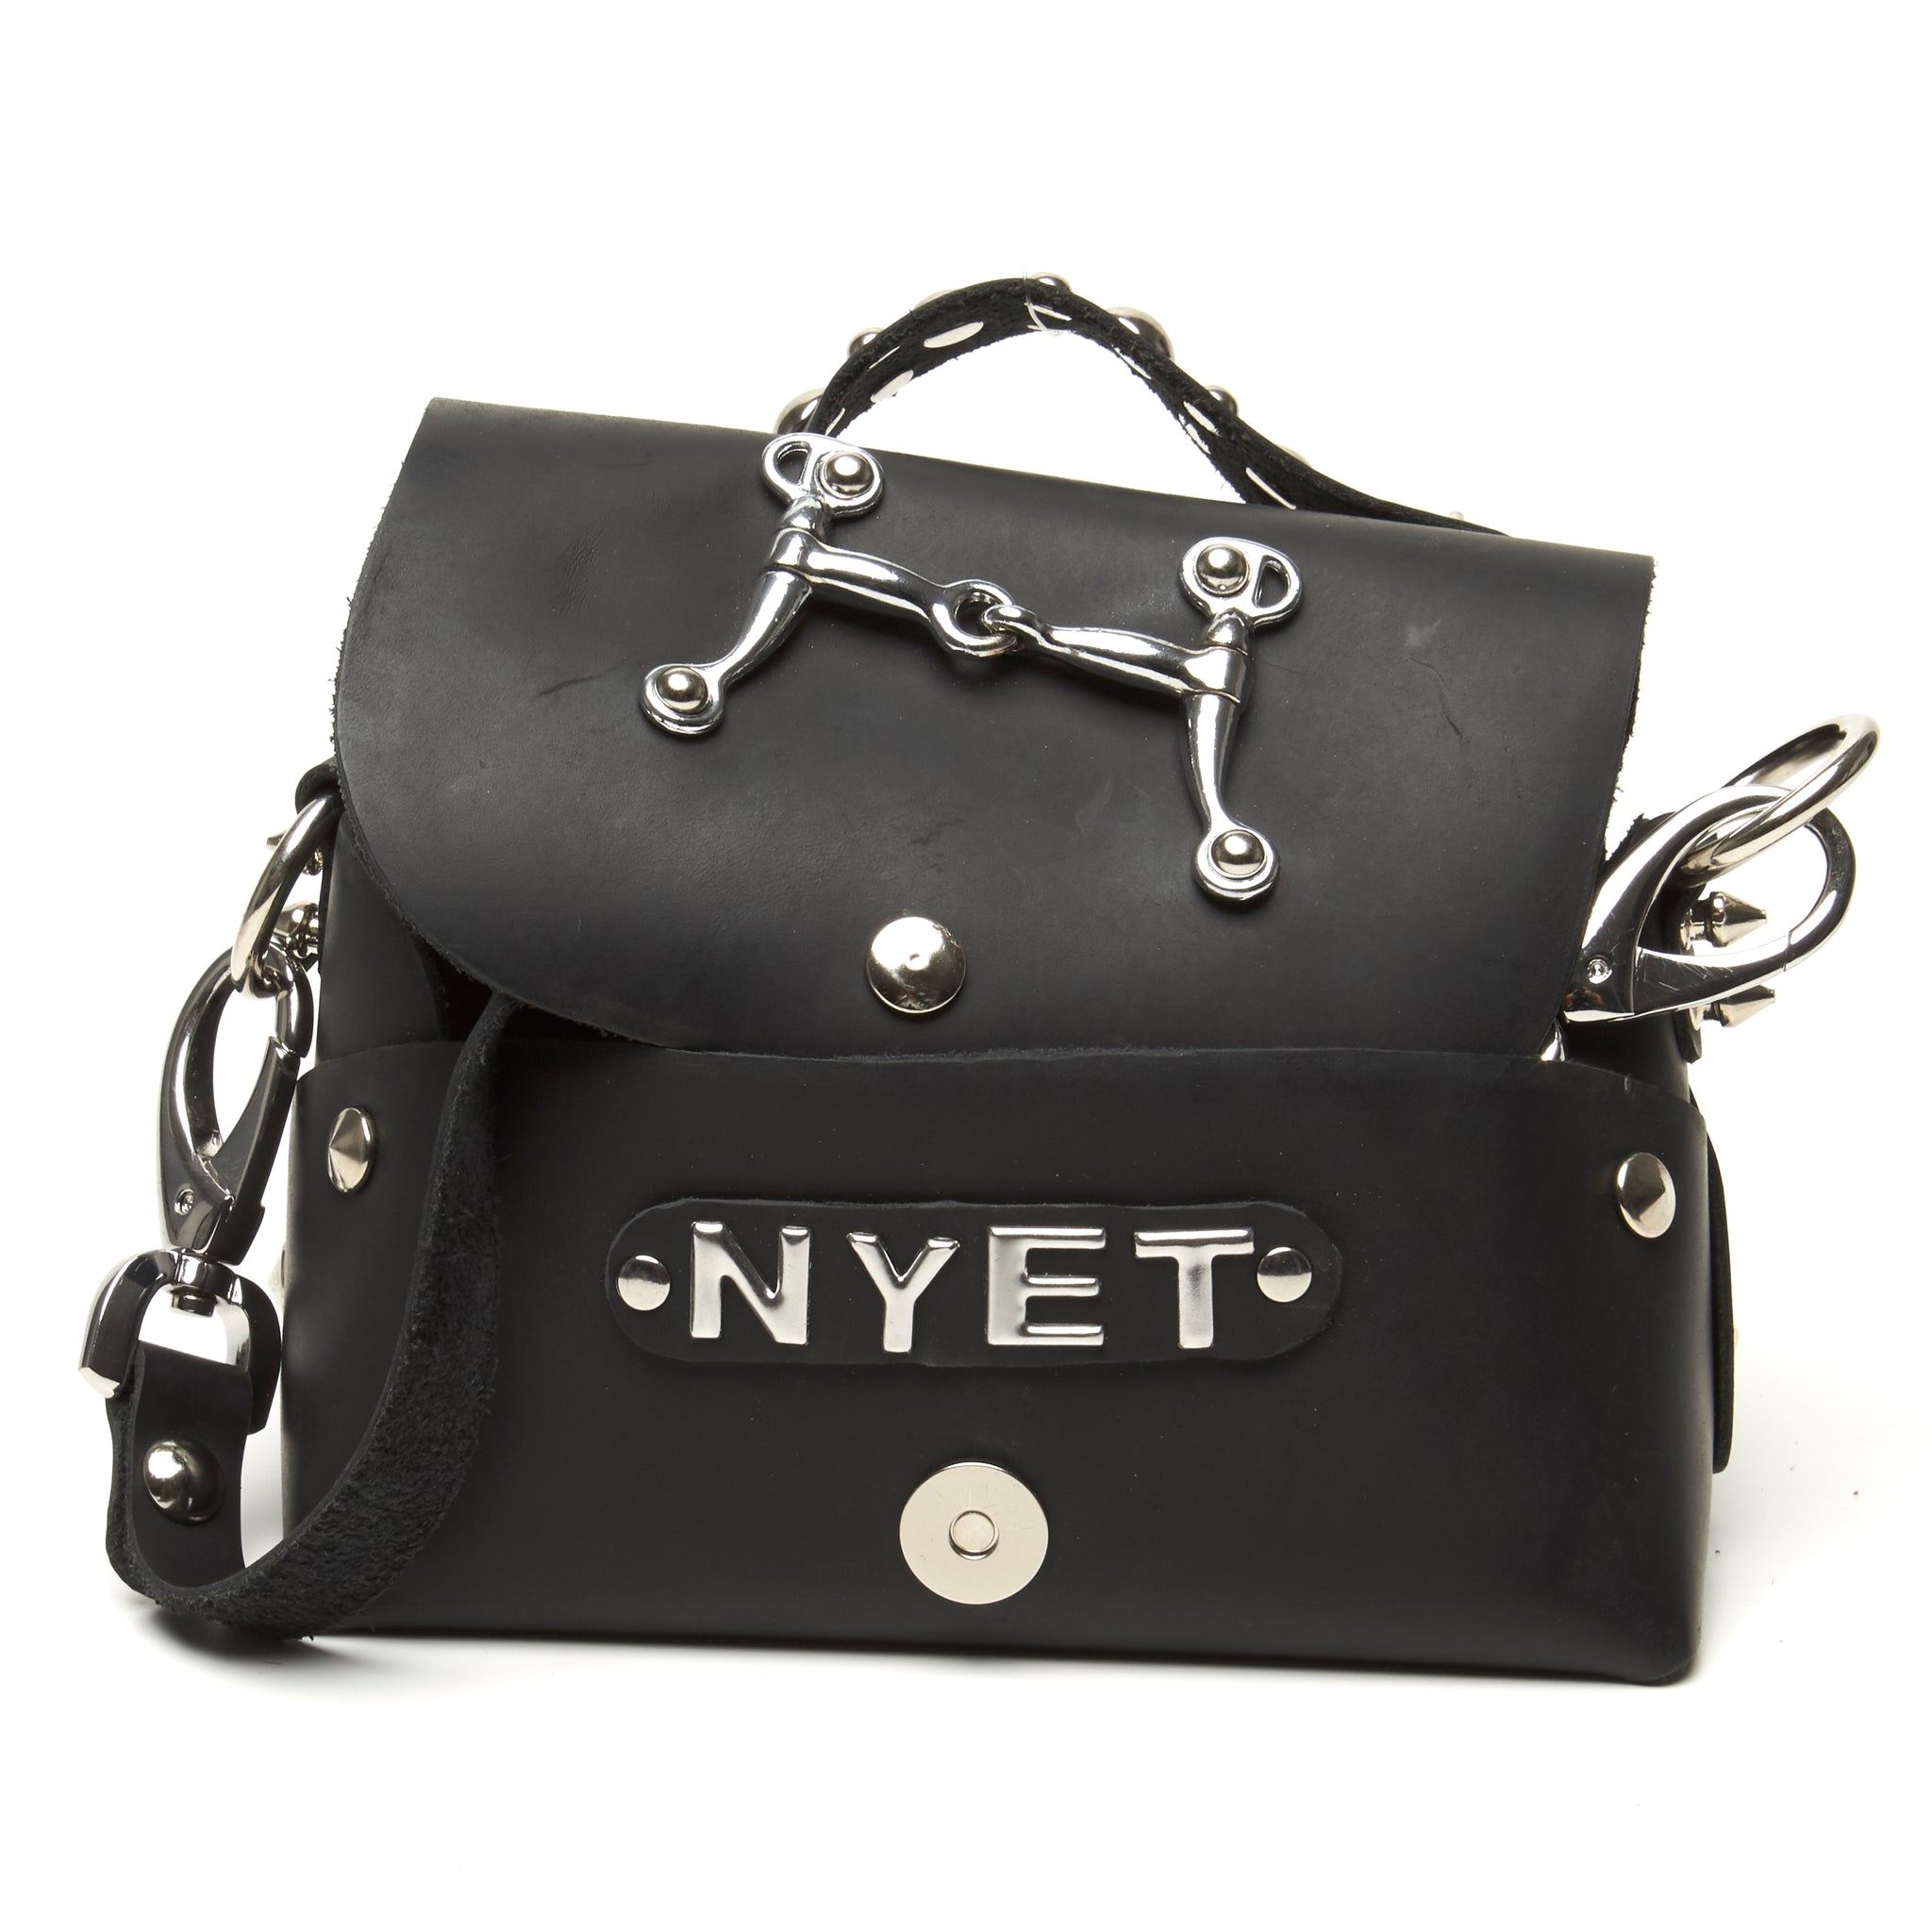 Nyet Jewelry leather lunch box evening bag